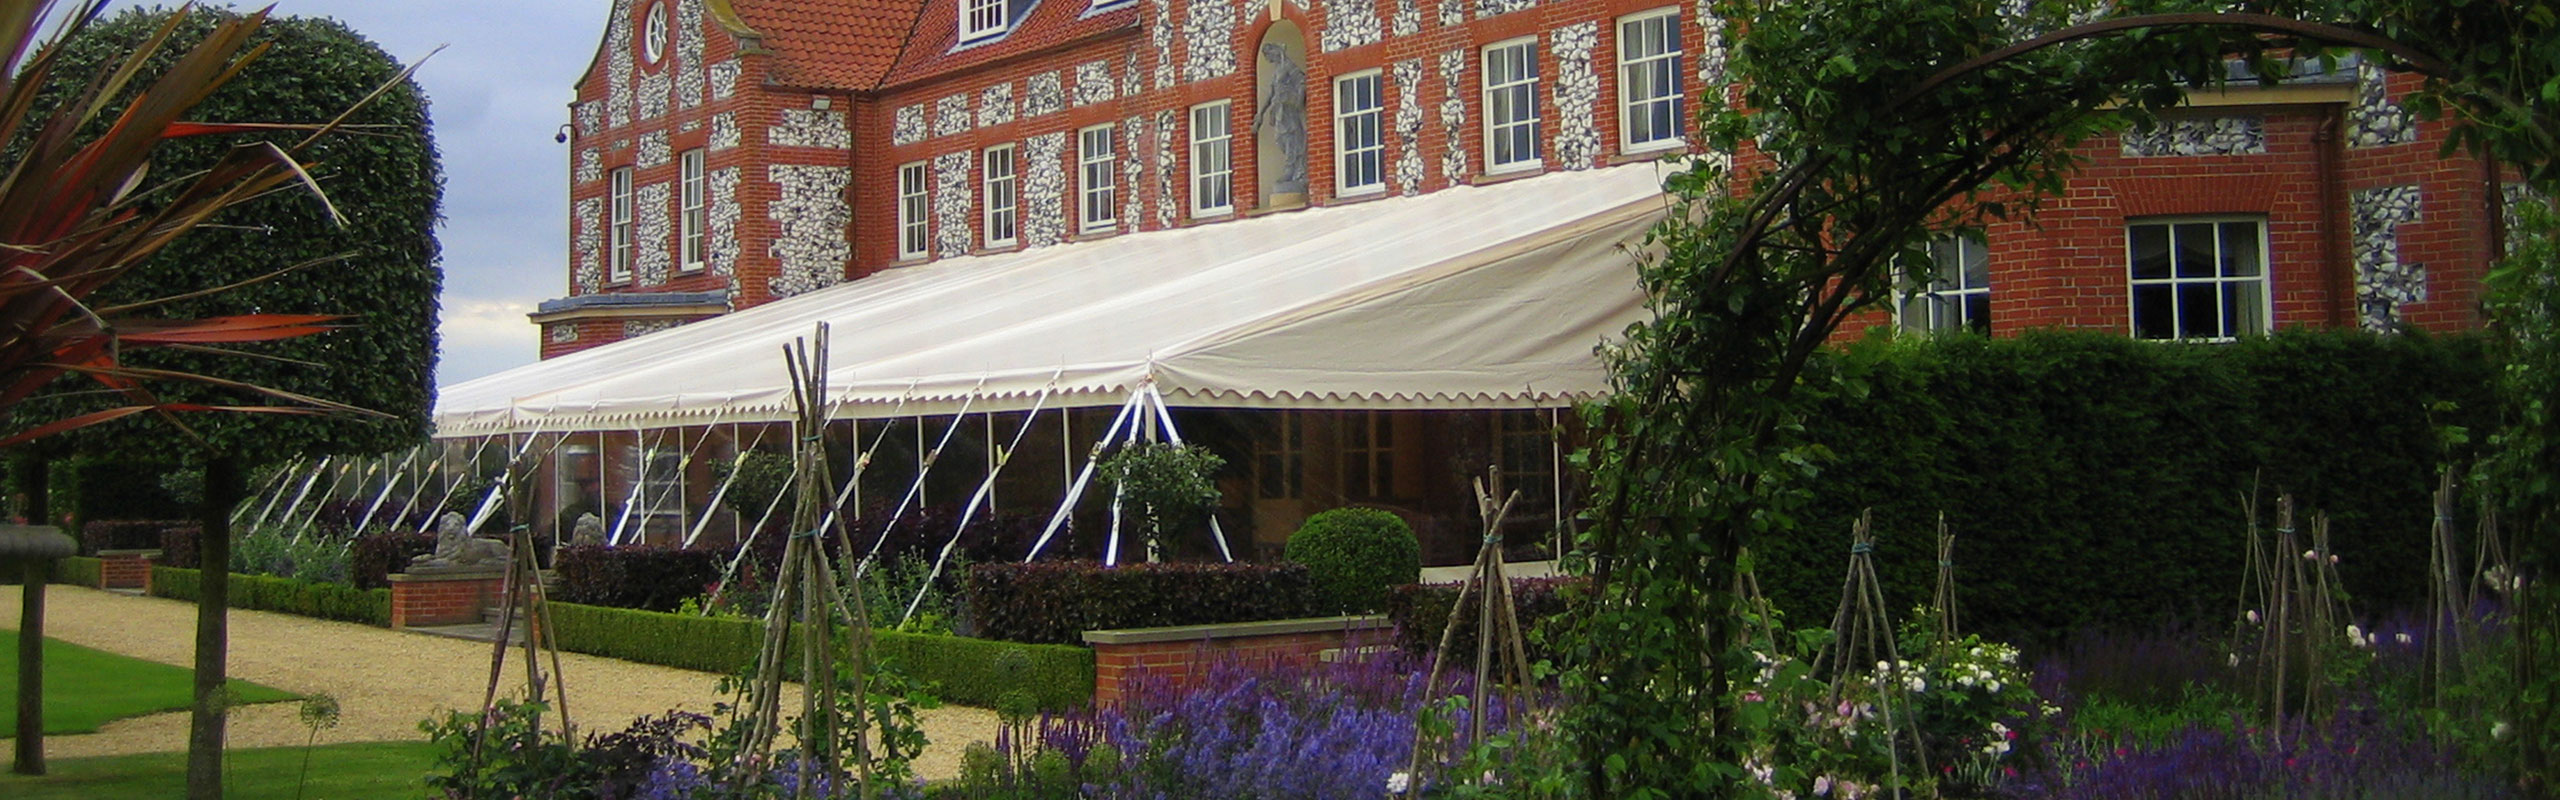 Event Marquees To Buy